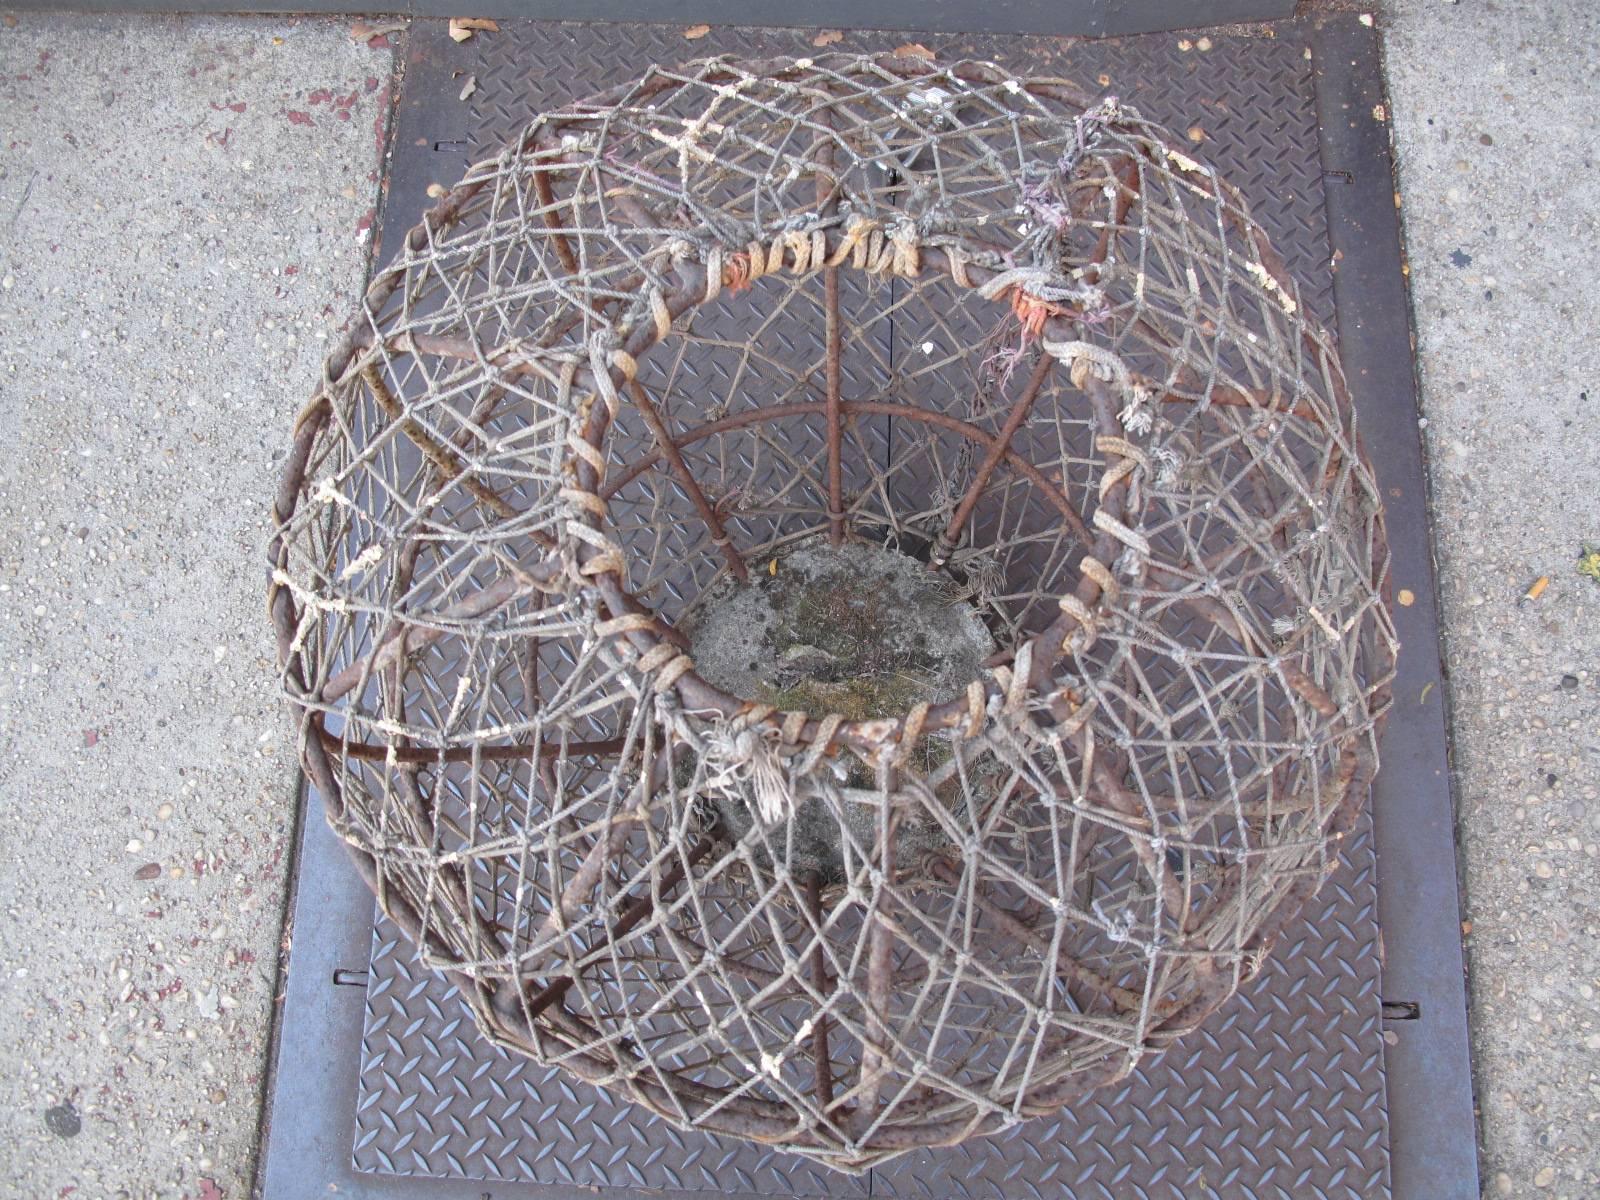 Massive weighted iron crab pot. Hand-knotted using a variety of ropes. Concrete base.